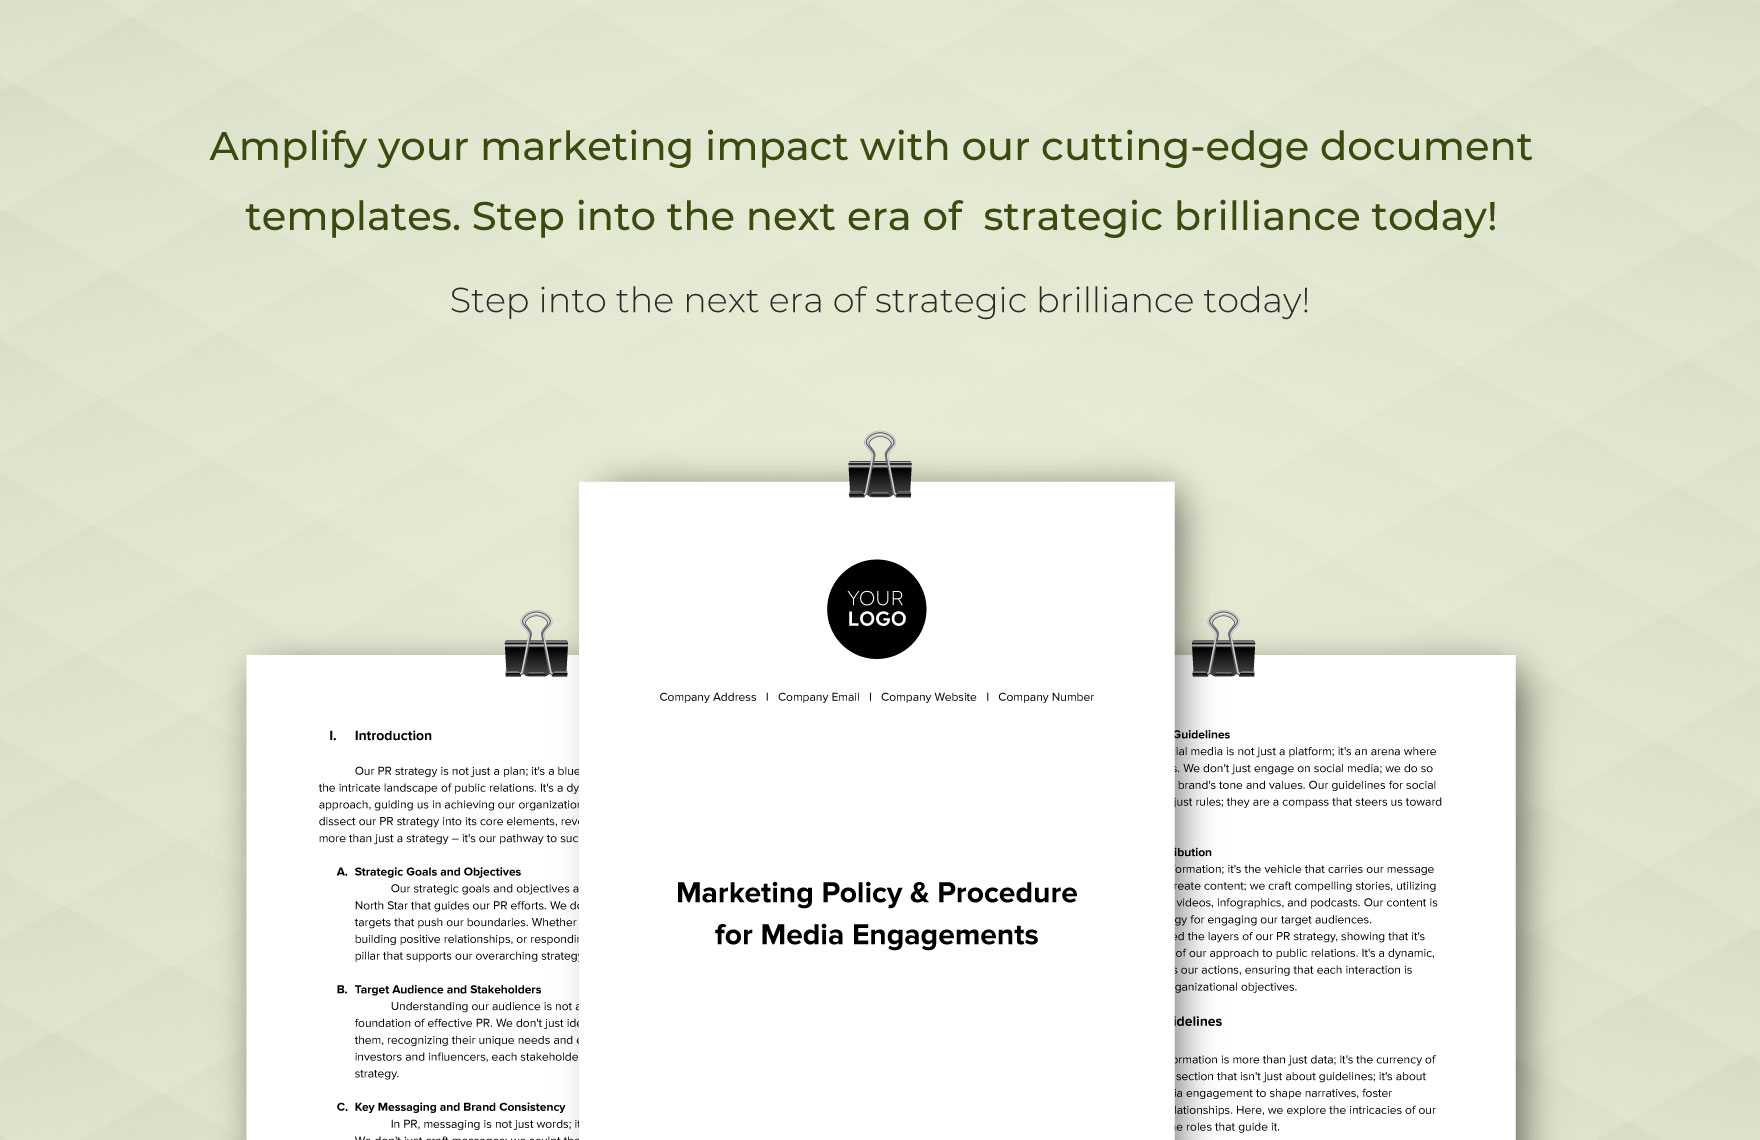 Marketing Policy & Procedure for Media Engagements Template